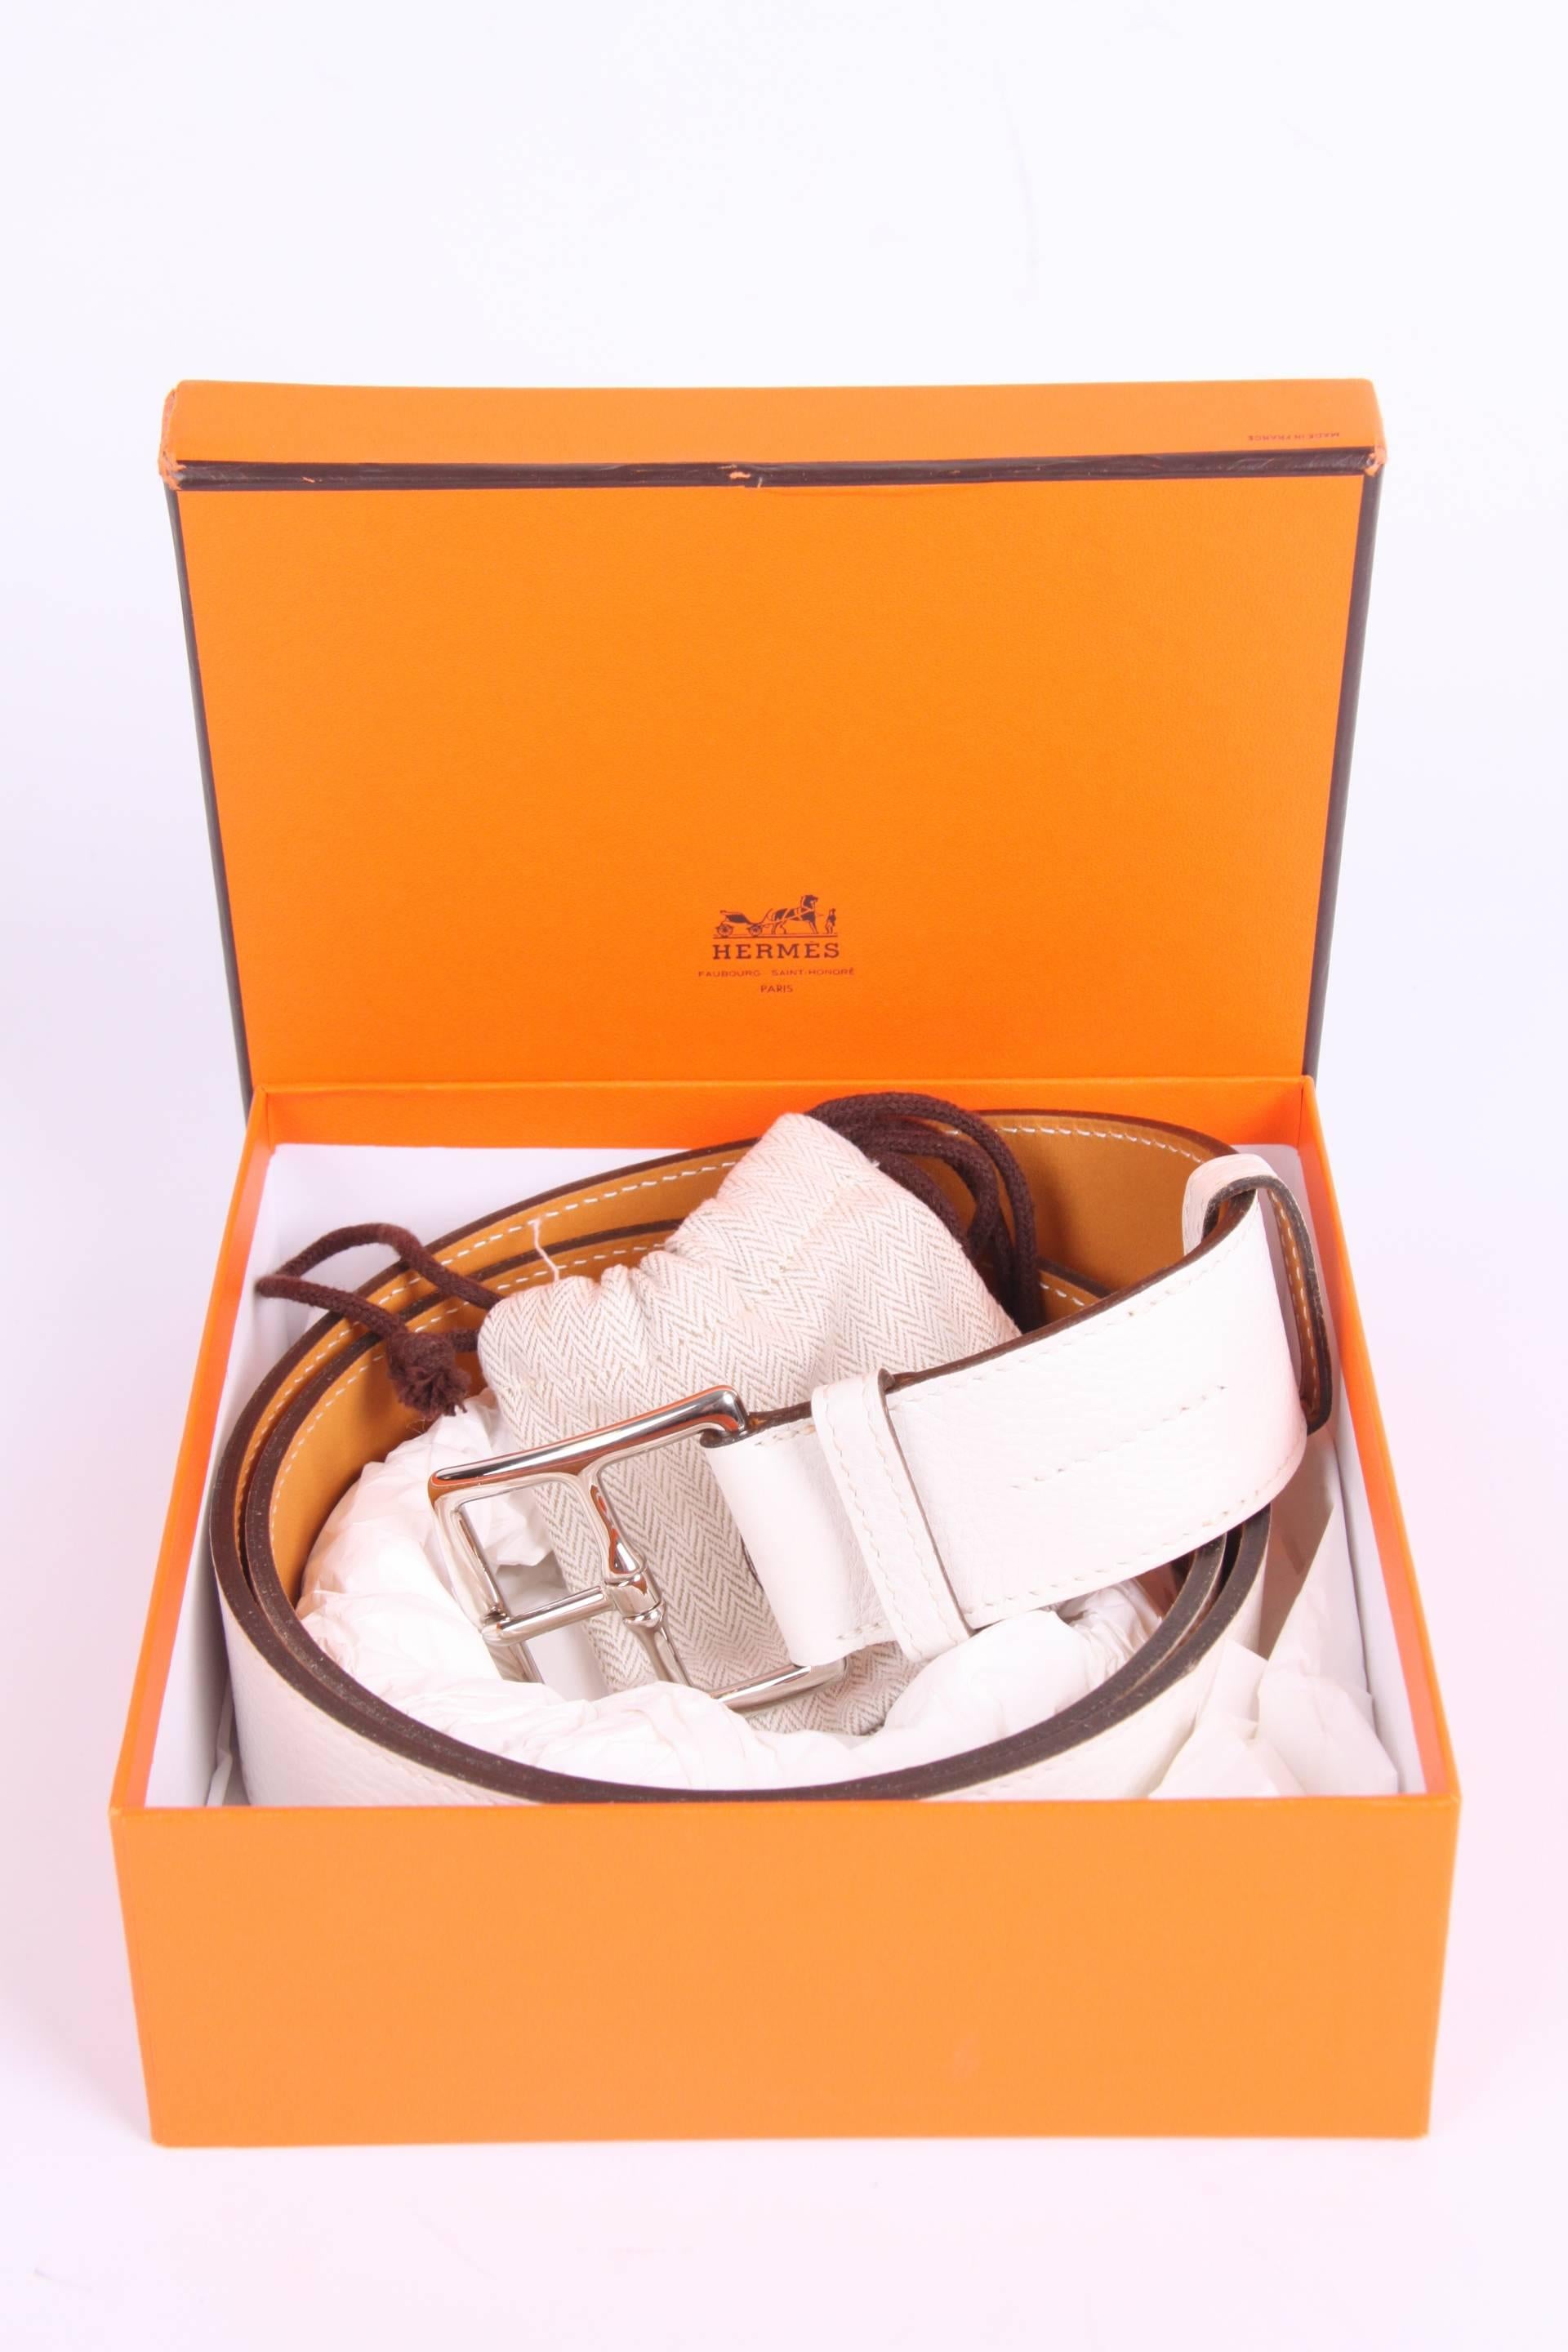 This belt has a beautiful name; it is the Hermès Etrivière Taurillon Clemence belt in white calfskin leather. And it is unisex.

Brand new item, comes with a little orange Hermès box and dustbag for the buckle. The buckle is crafted in silver-tone